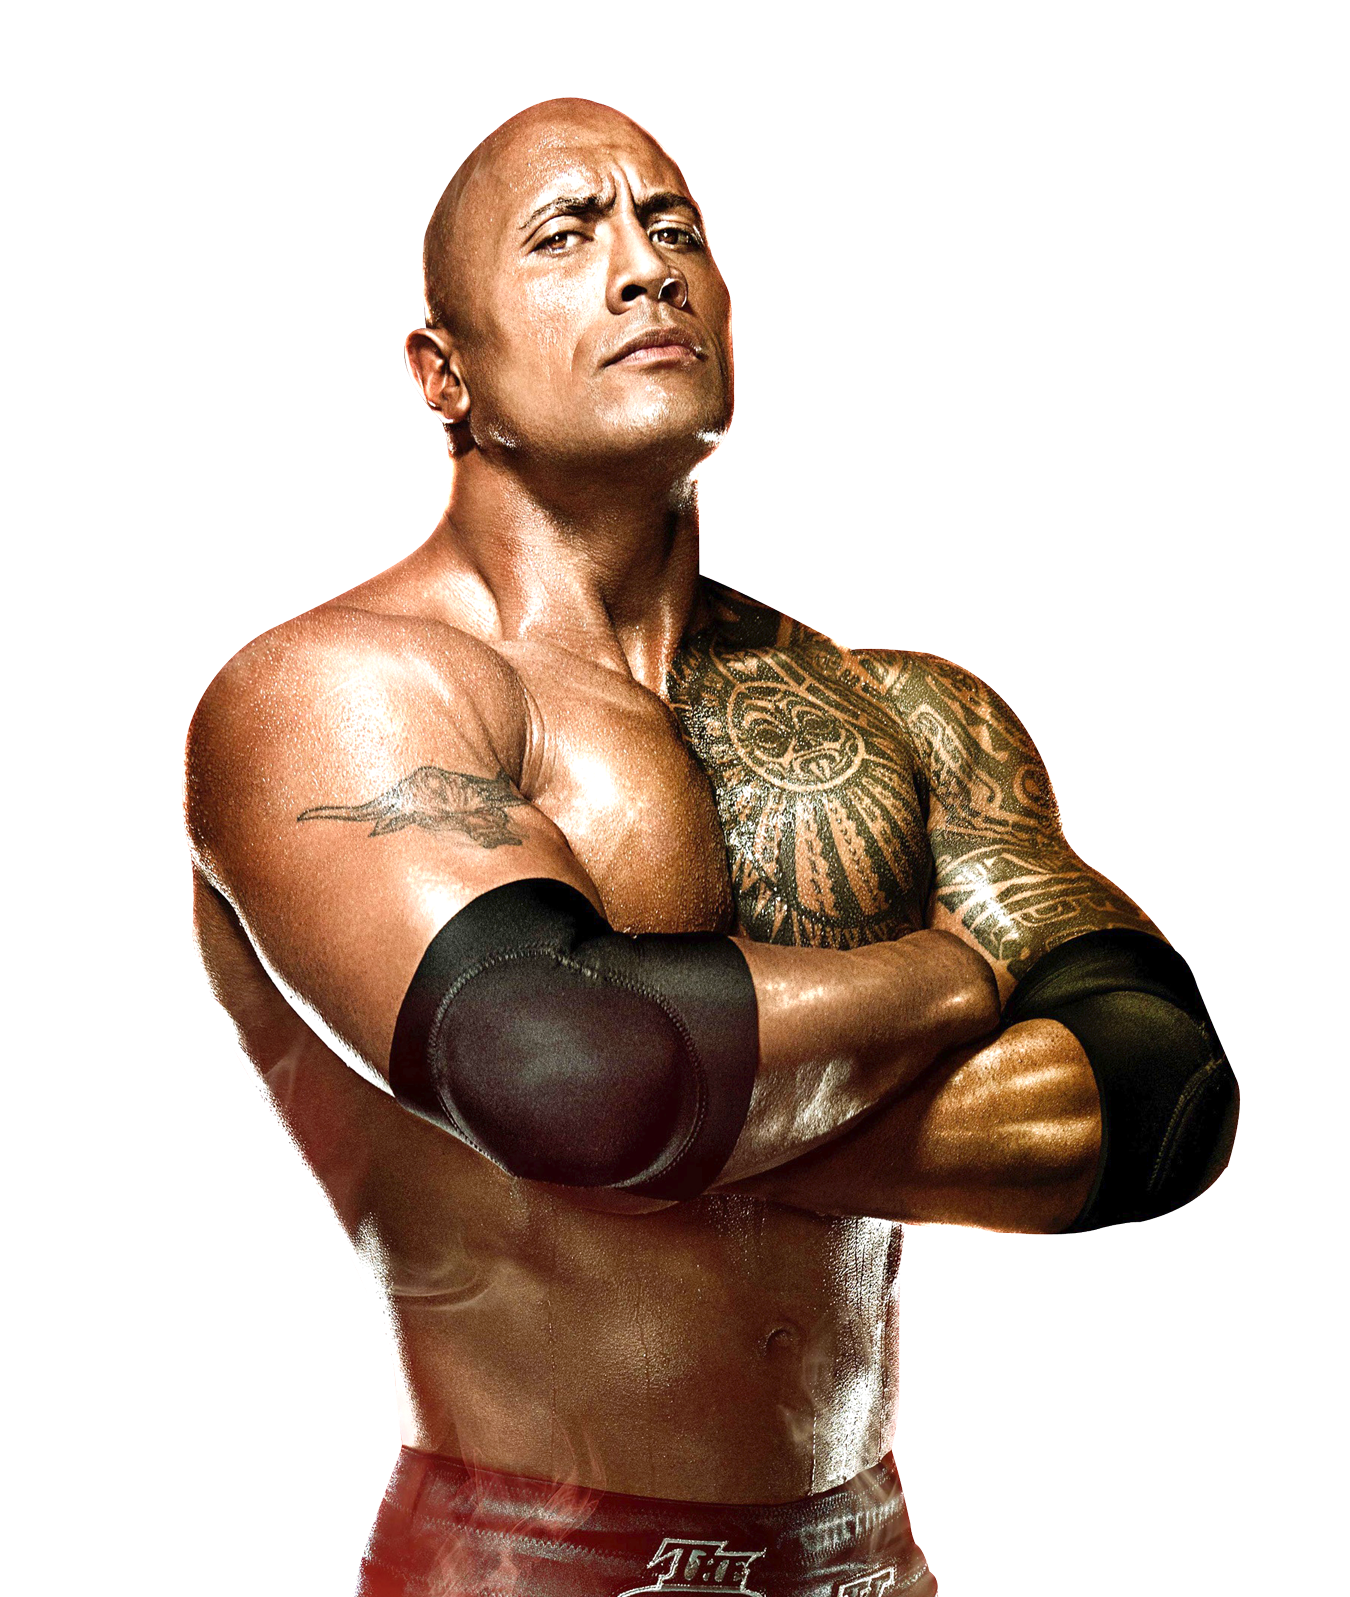 Muscular Manwith Tattoos PNG image